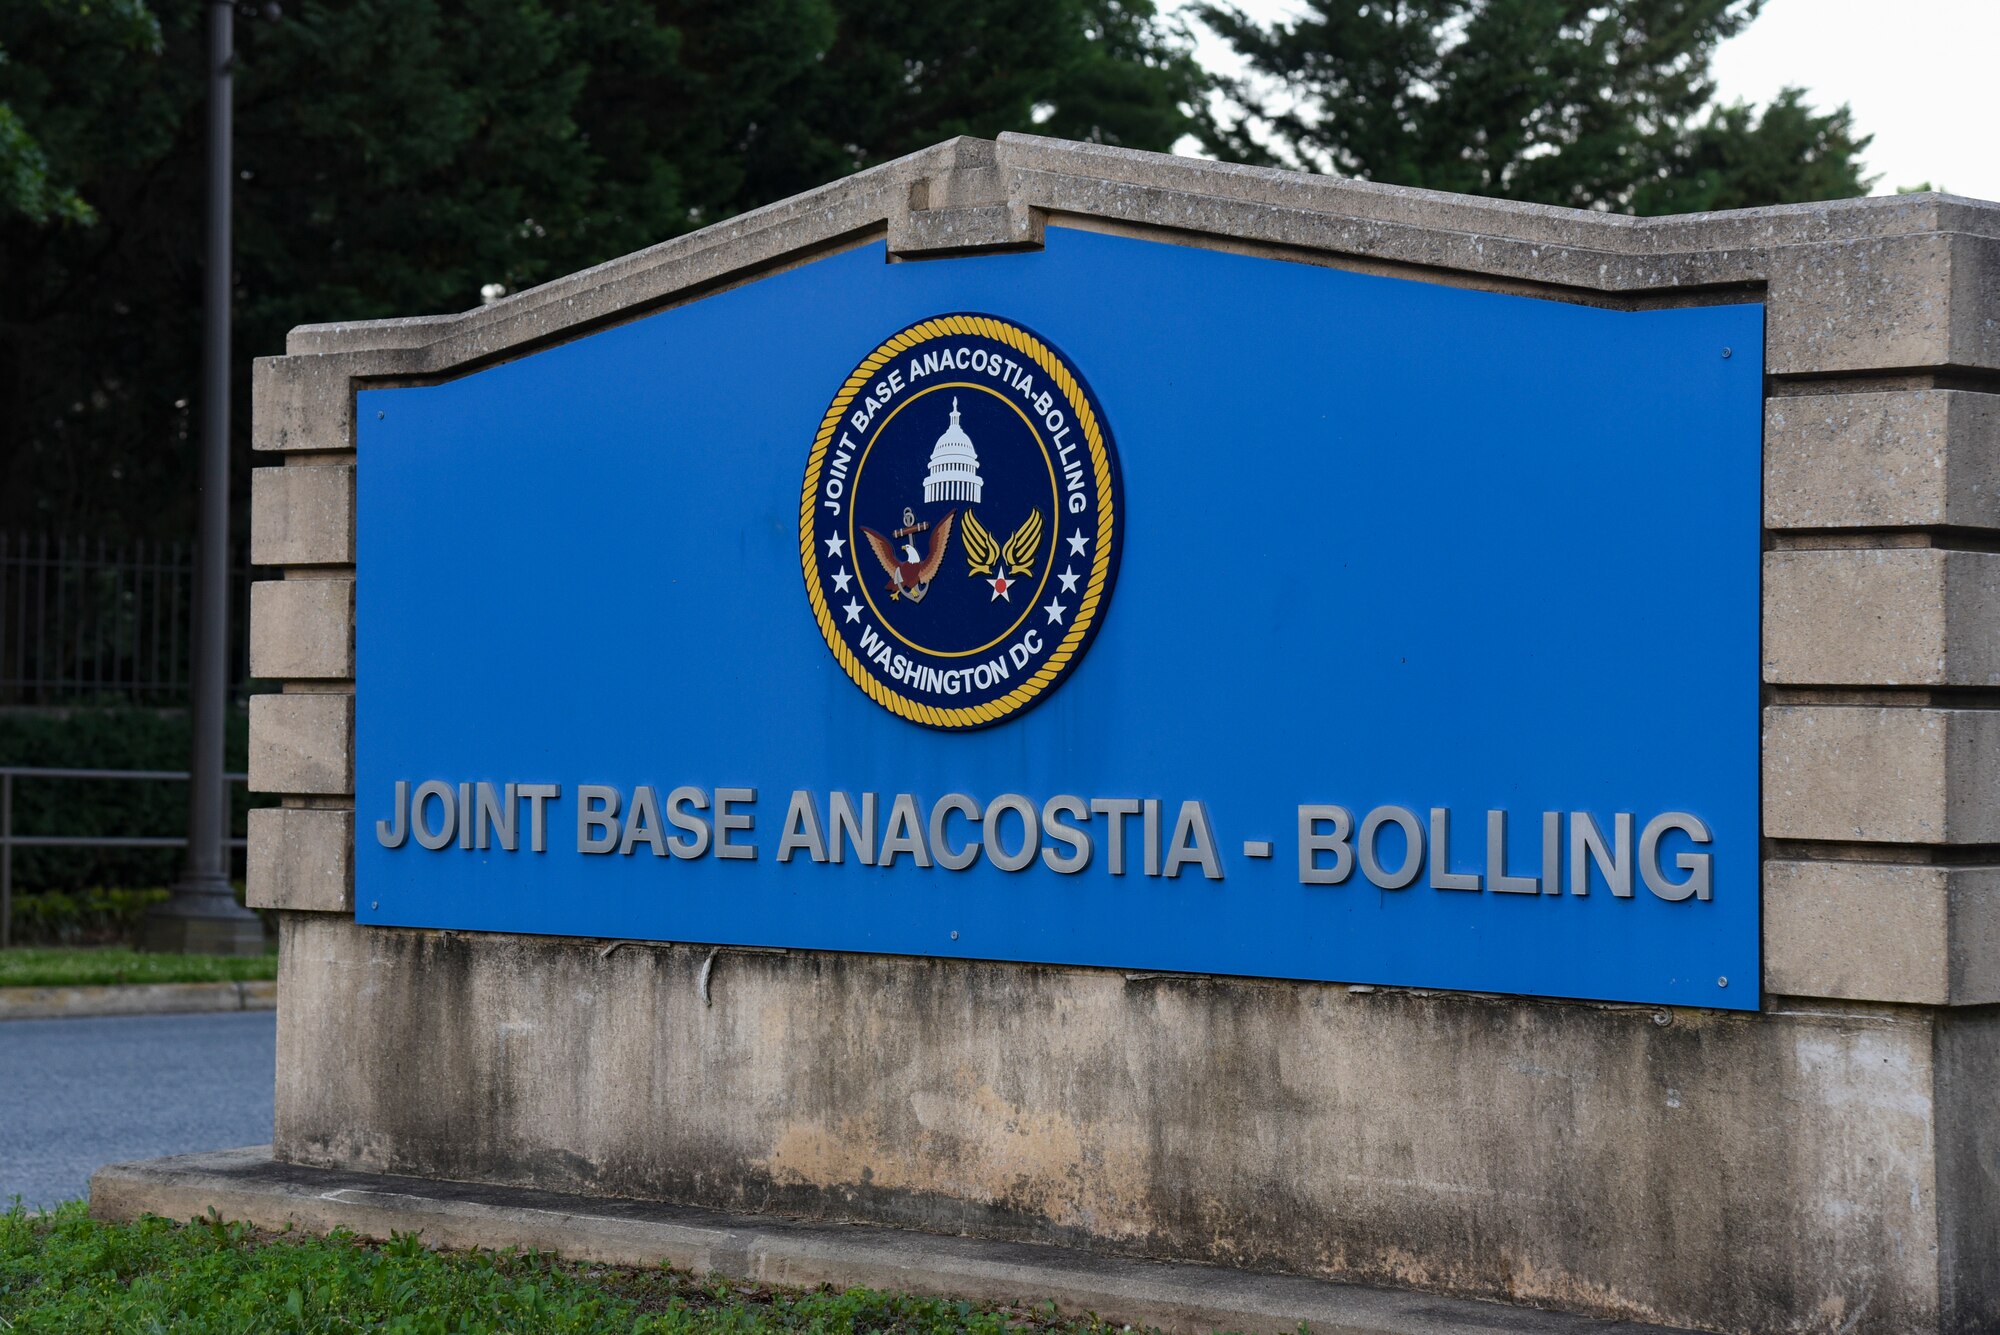 Sign at the entrance to Joint Base Anacostia-Bolling, Washington D.C., June 12, 2020.